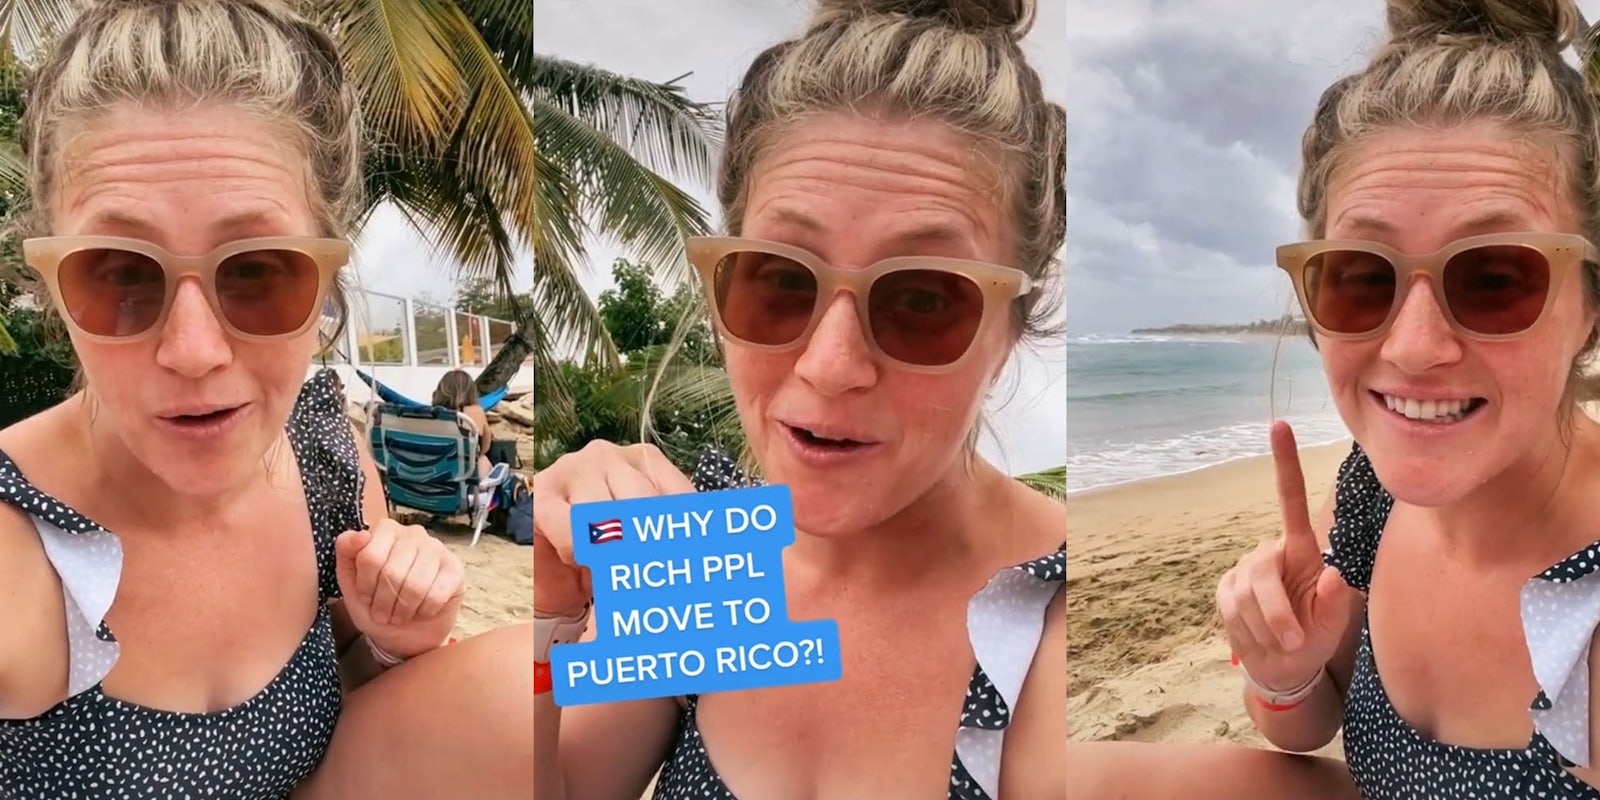 Woman at beach talking (l) woman at beach speaking pointing to caption 'WHY DO RICH PPL MOVE TO PUERTO RICO?!' (c) woman at beach speaking pointing finger up (r)